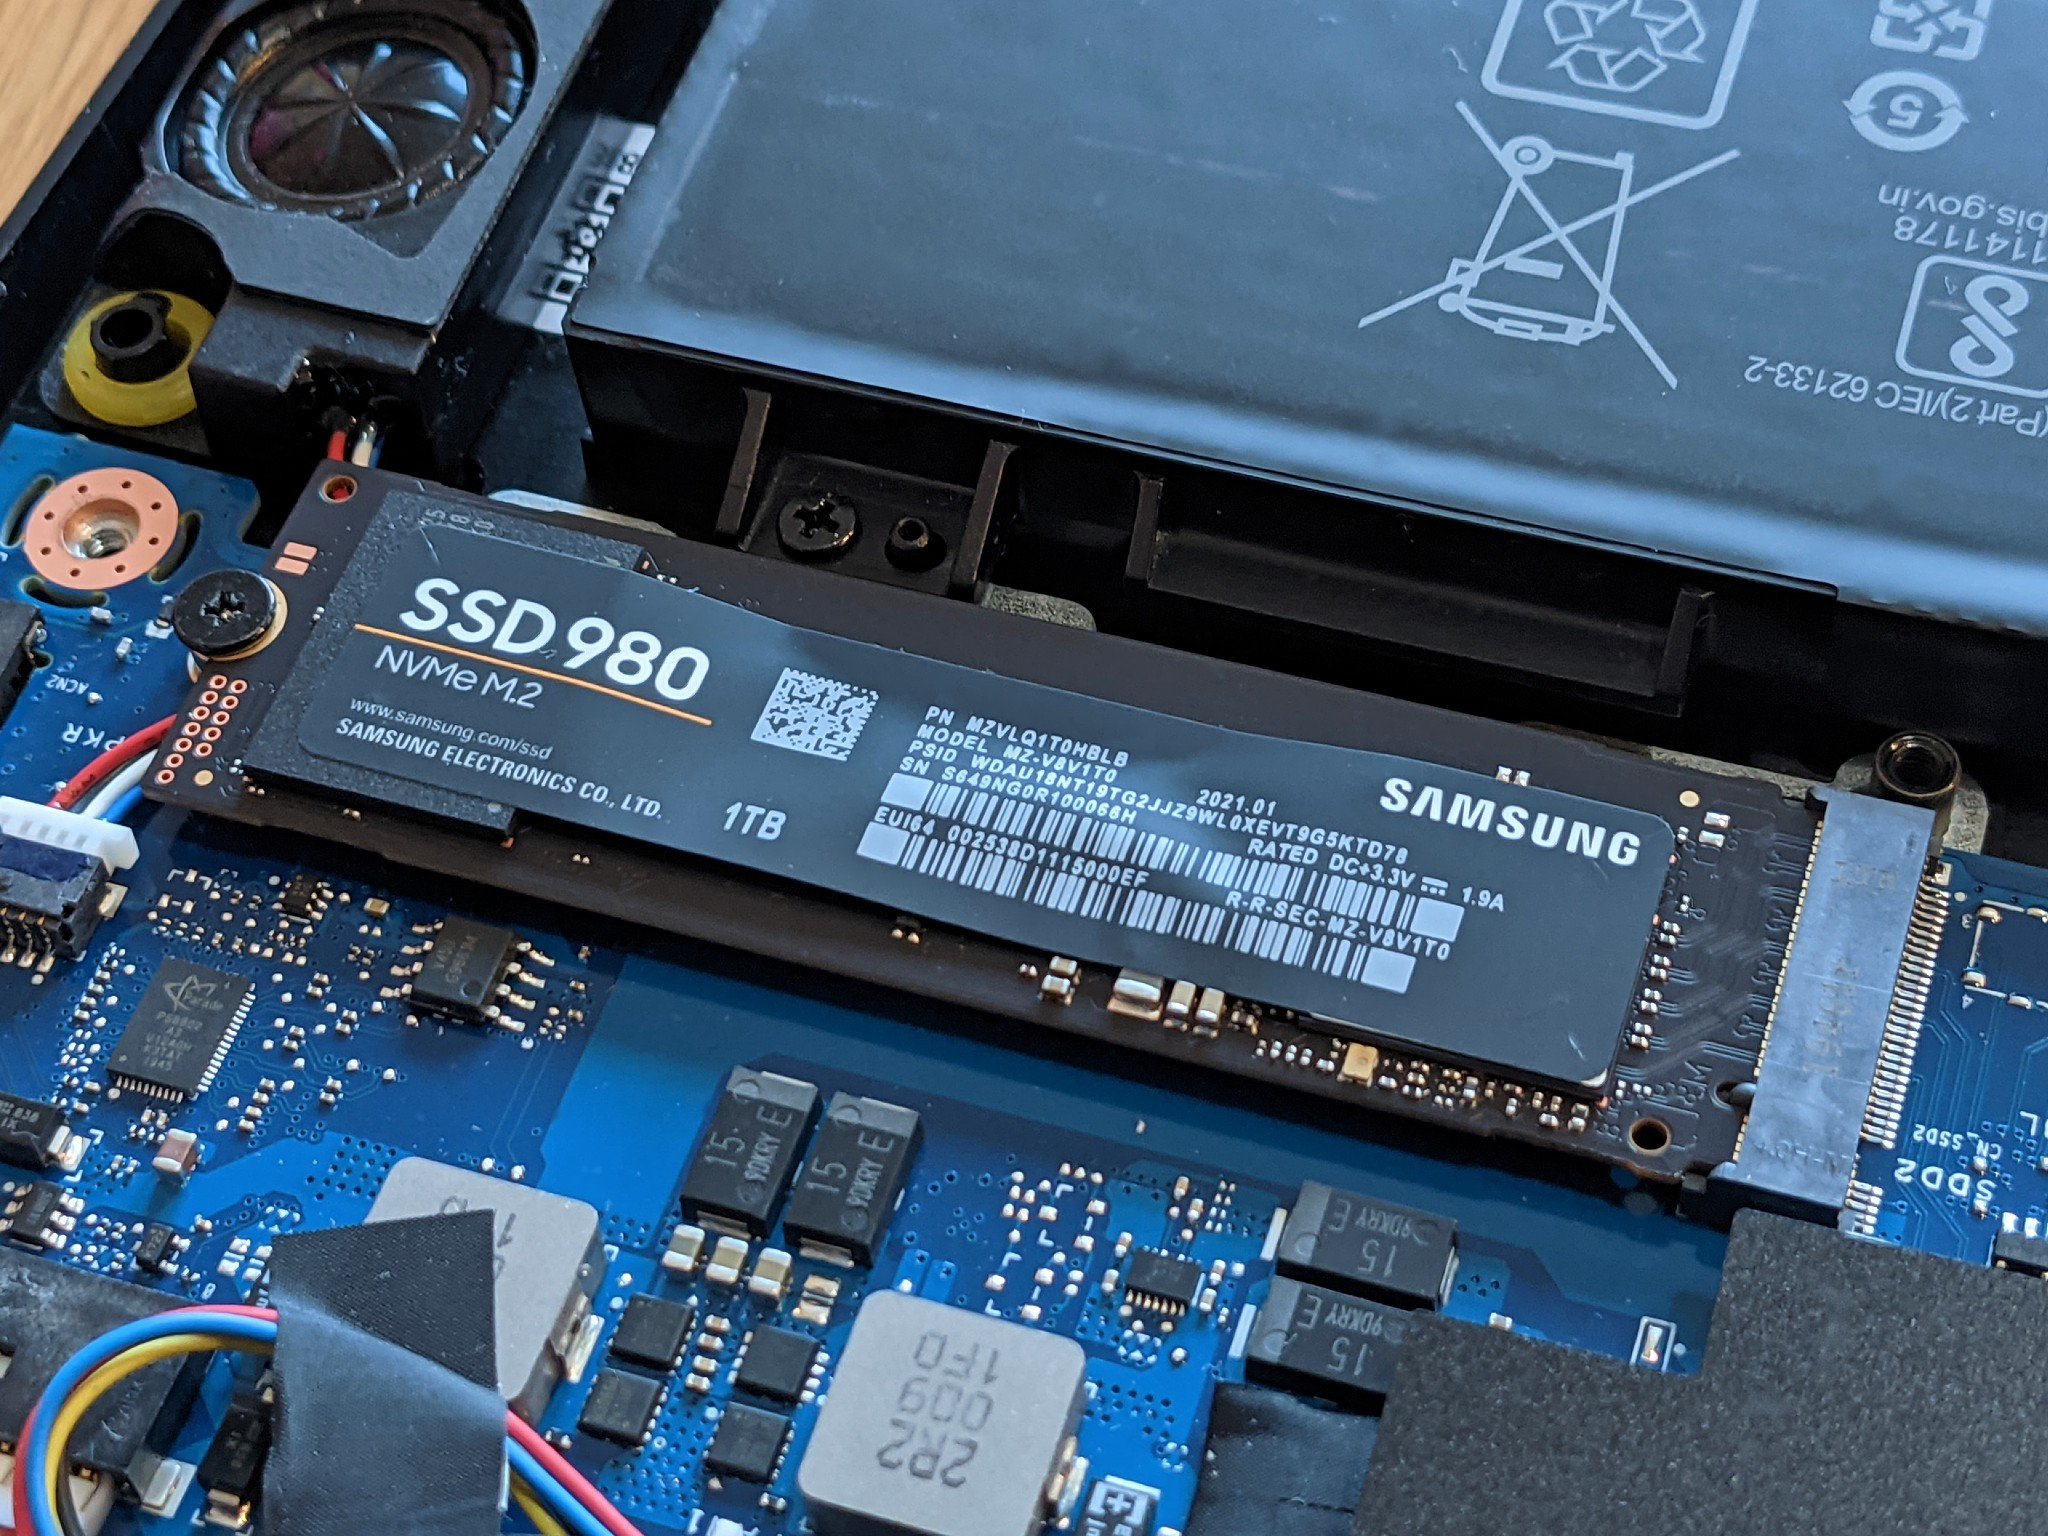 Samsung 980 SSD 1TB review